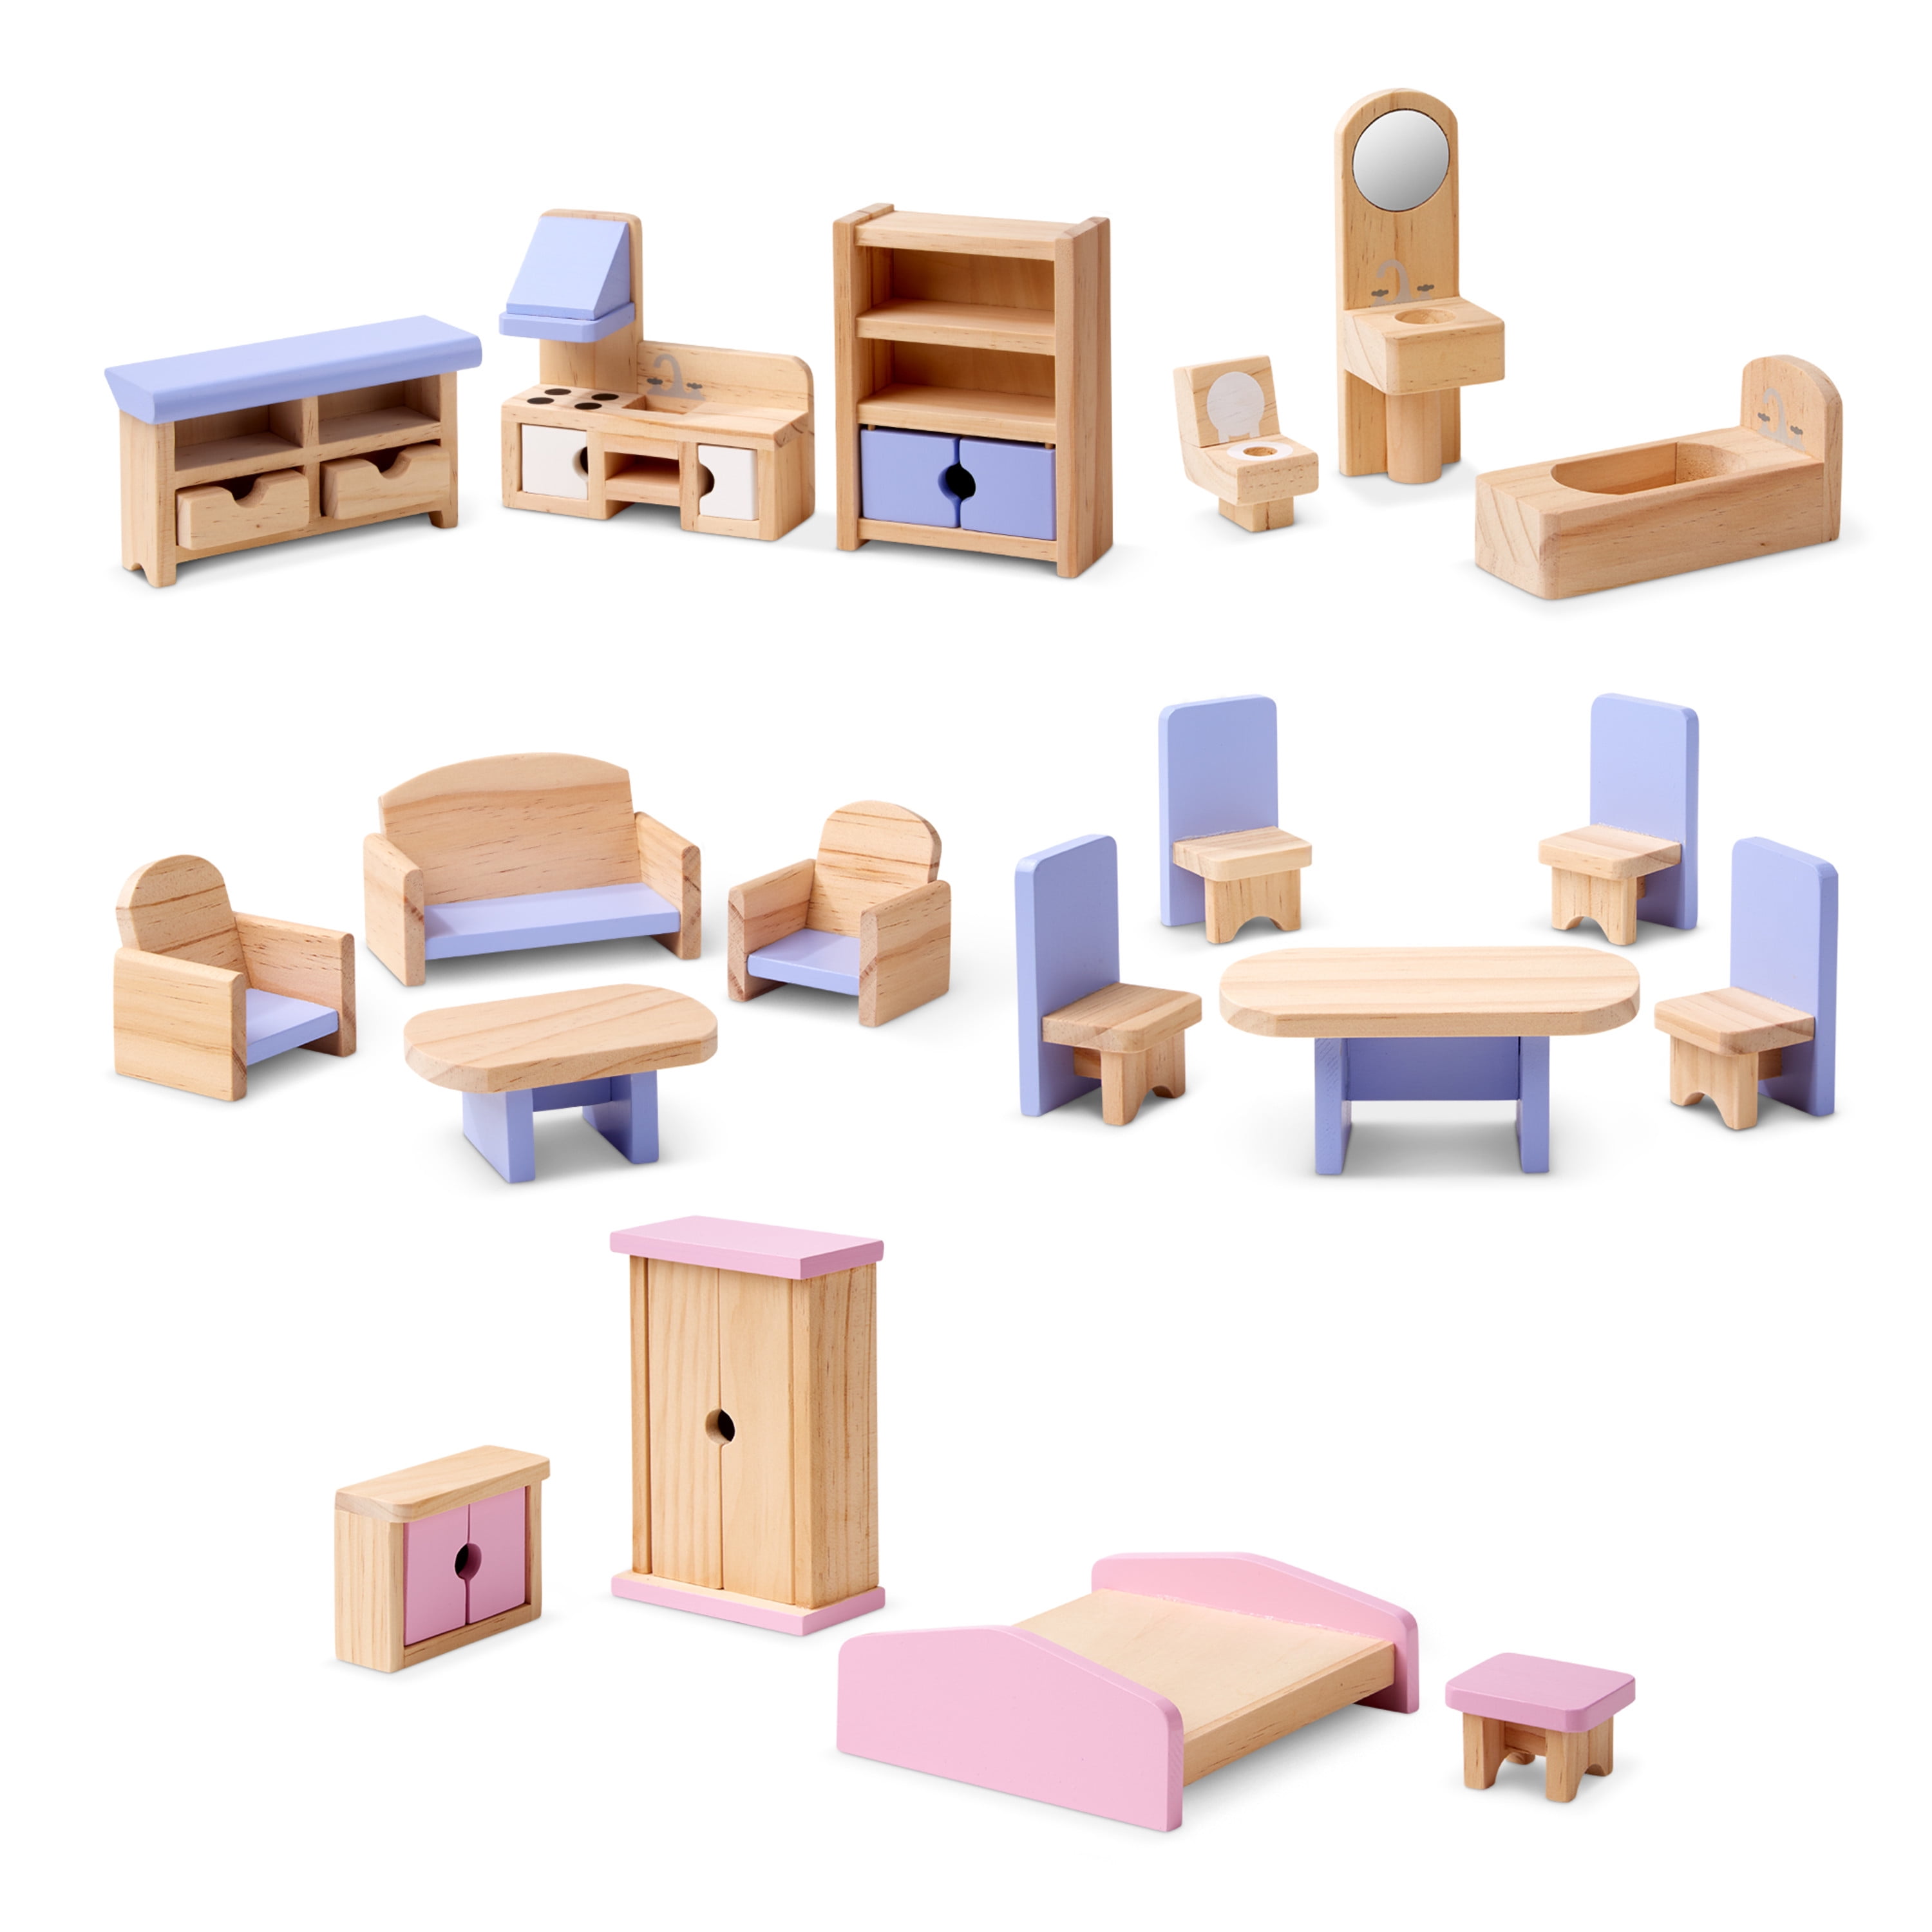 Melissa & Doug Modern Wooden Multi-level Dollhouse With 19 Pcs Furniture White for sale online 